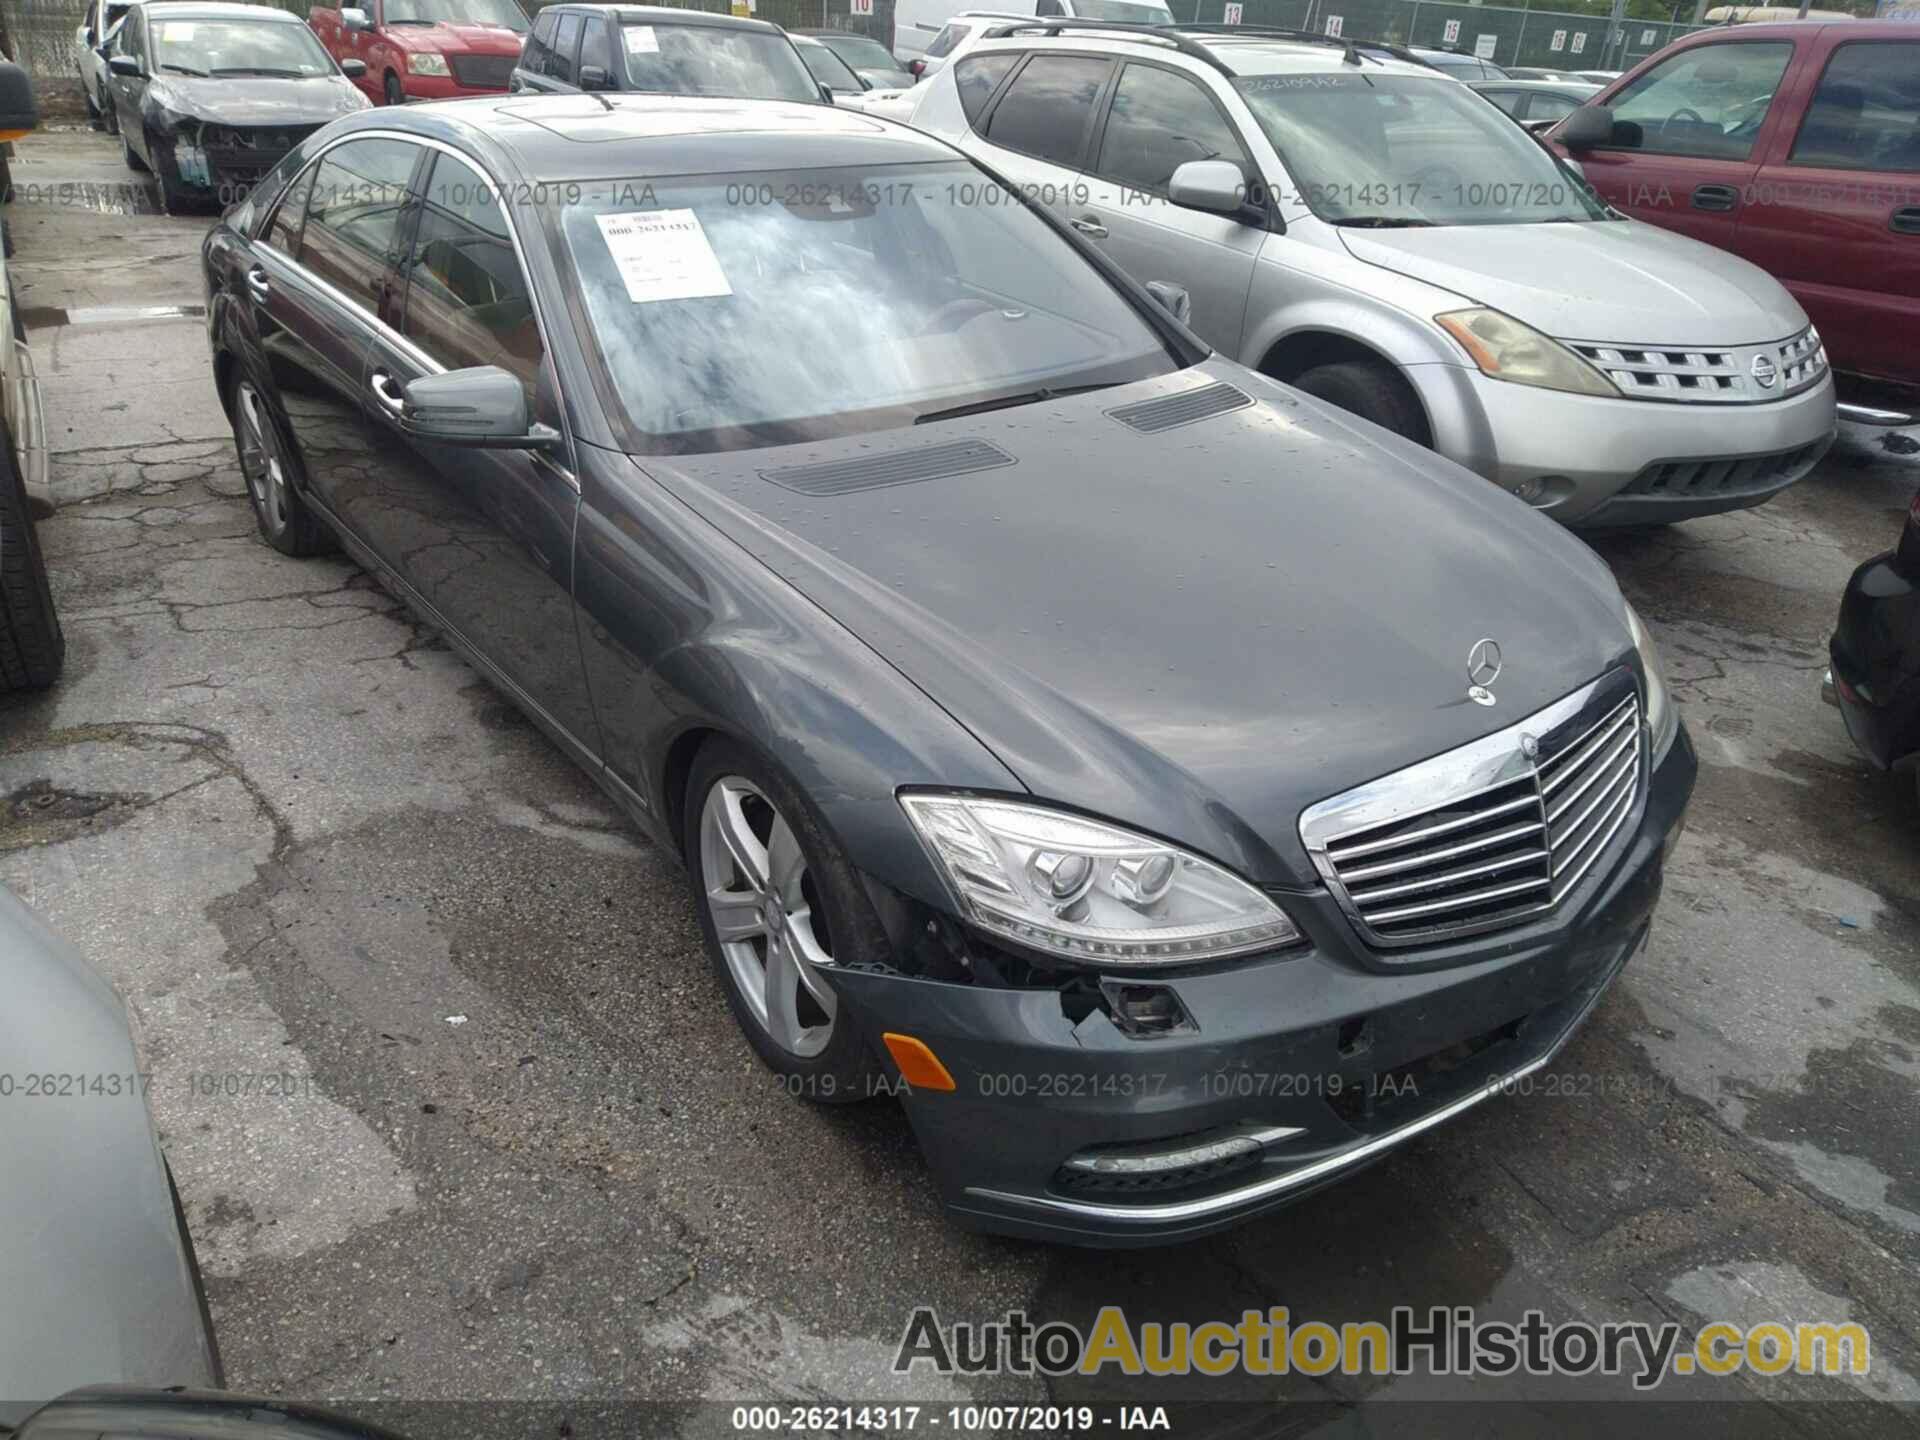 MERCEDES-BENZ S 550 4MATIC, WDDNG8GB0AA307080